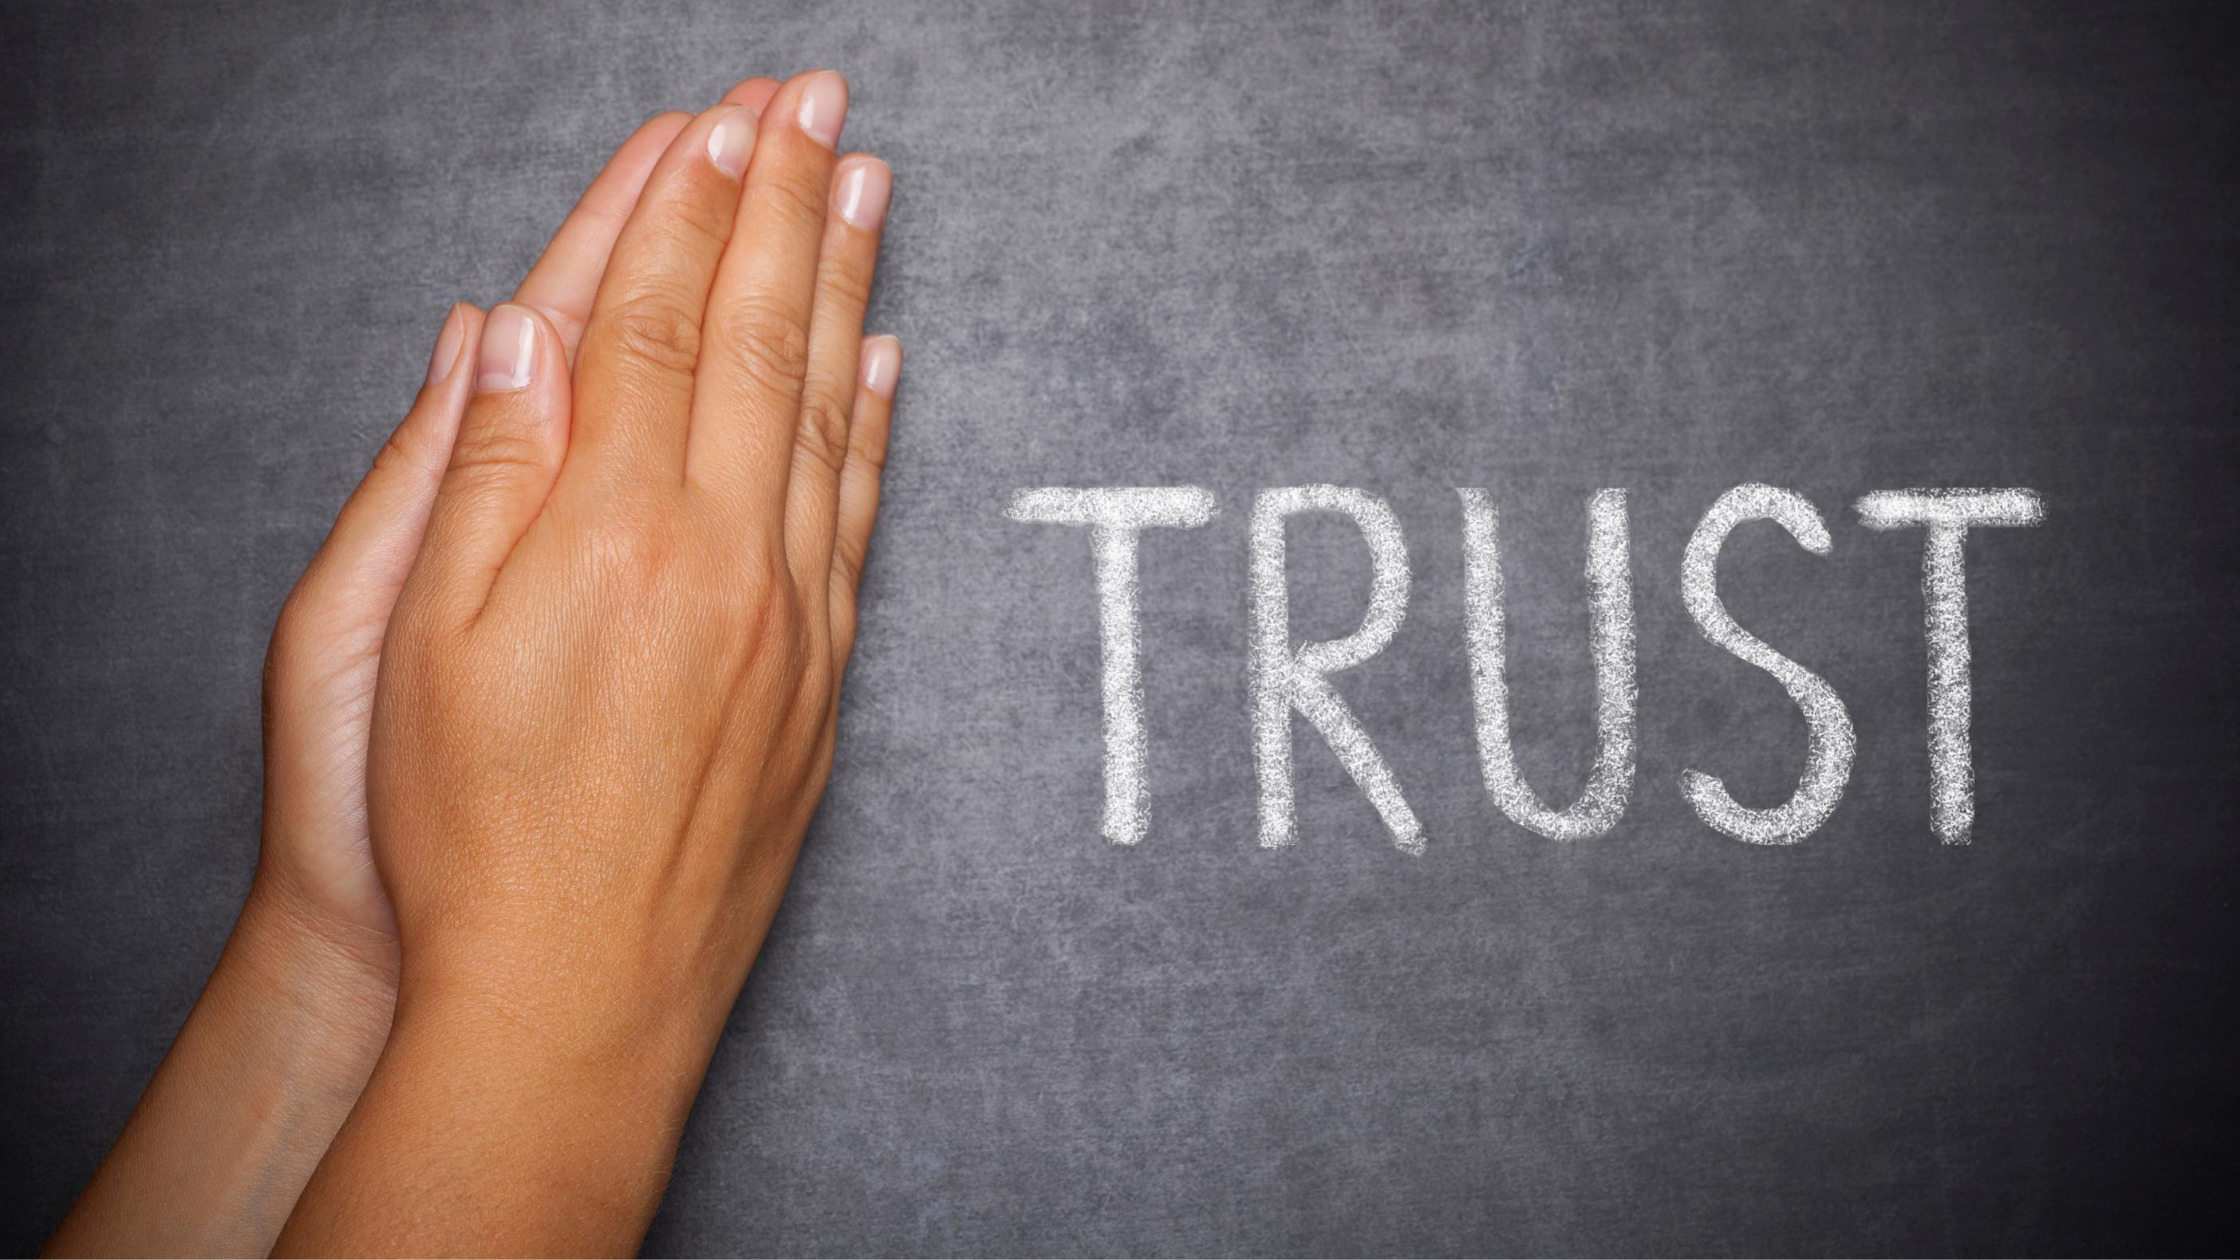 Read more about the article Navigating Your Trust Issues In A Relationship